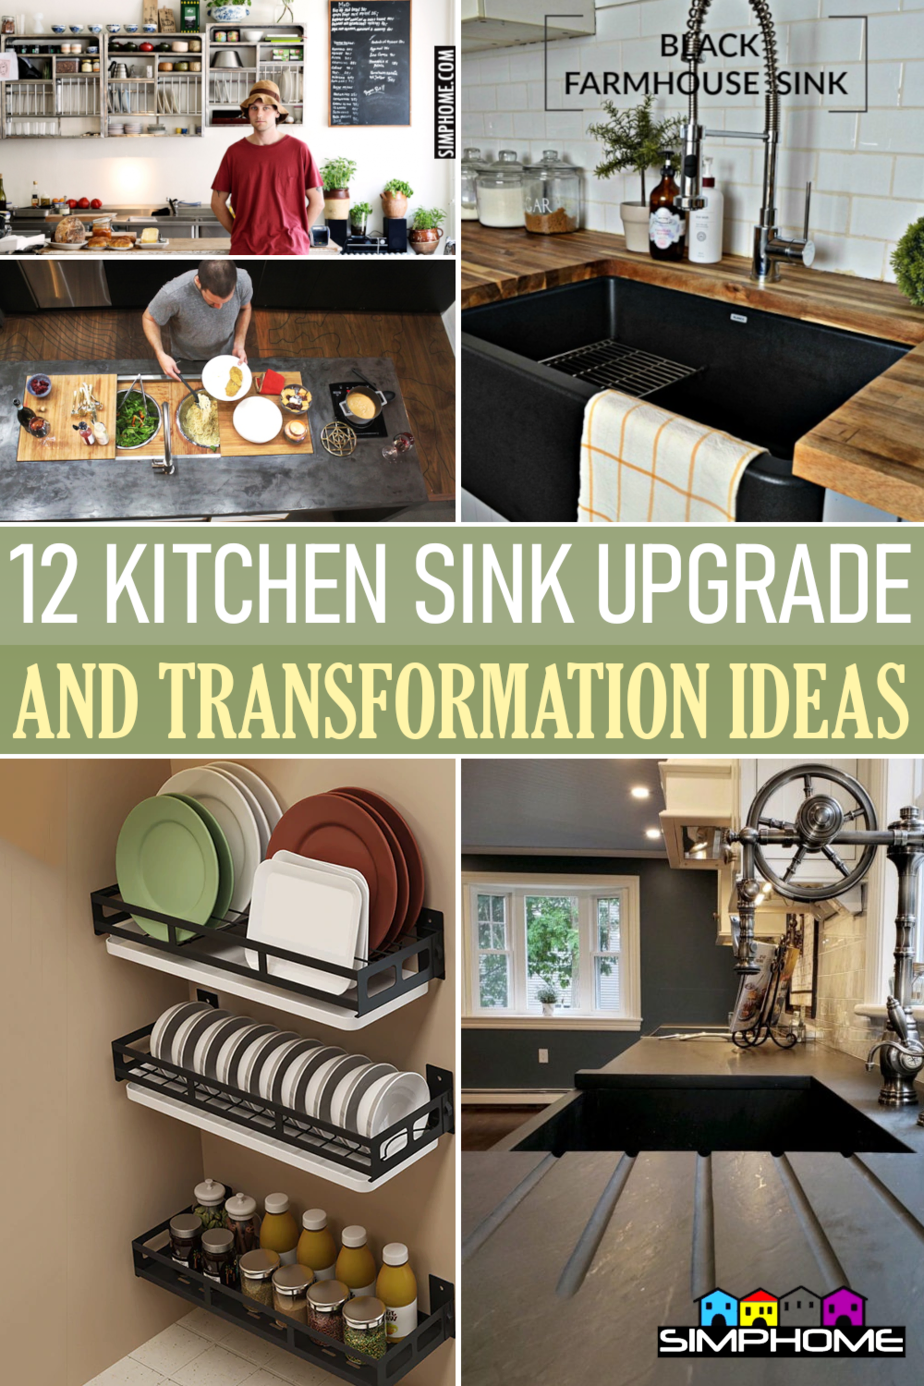 12 Kitchen Sink Transformation and Organizations via Simphome.comFeatured